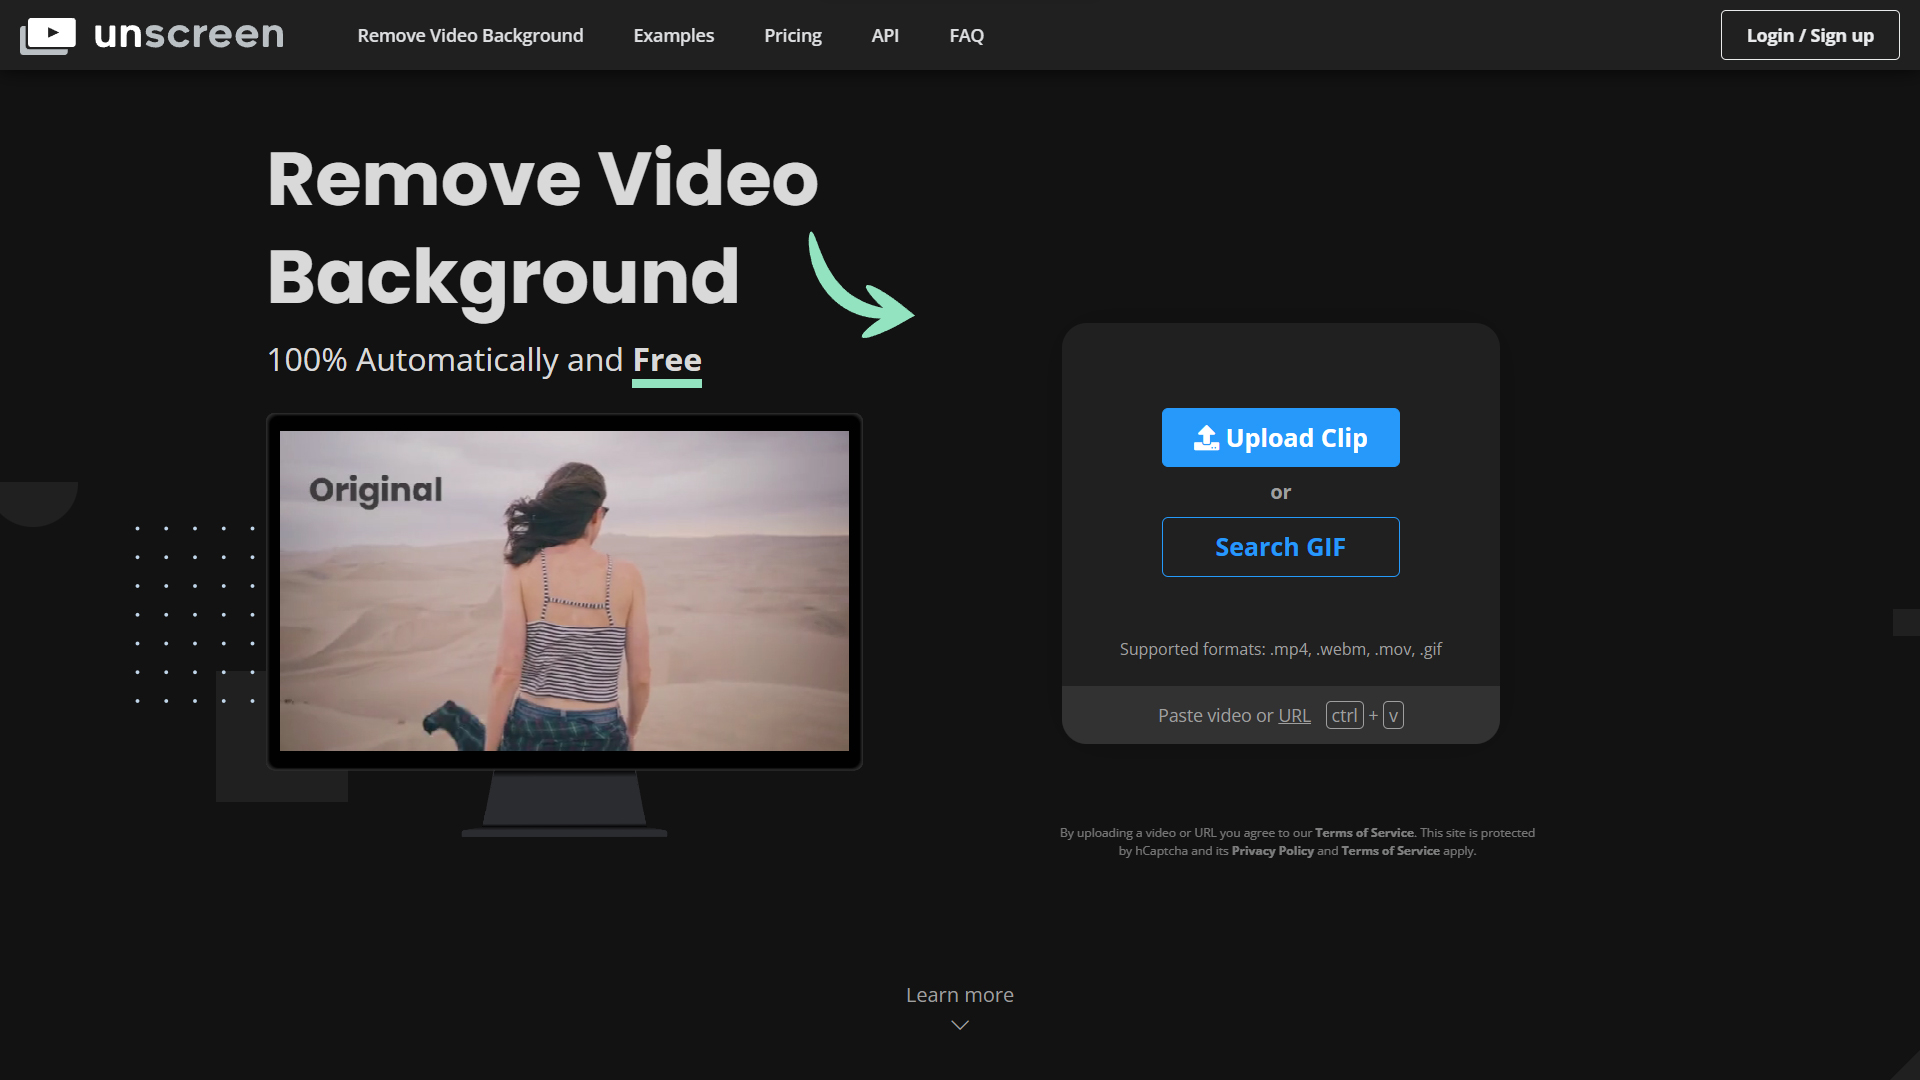 Unscreen - The Ultimate Video Background Eraser